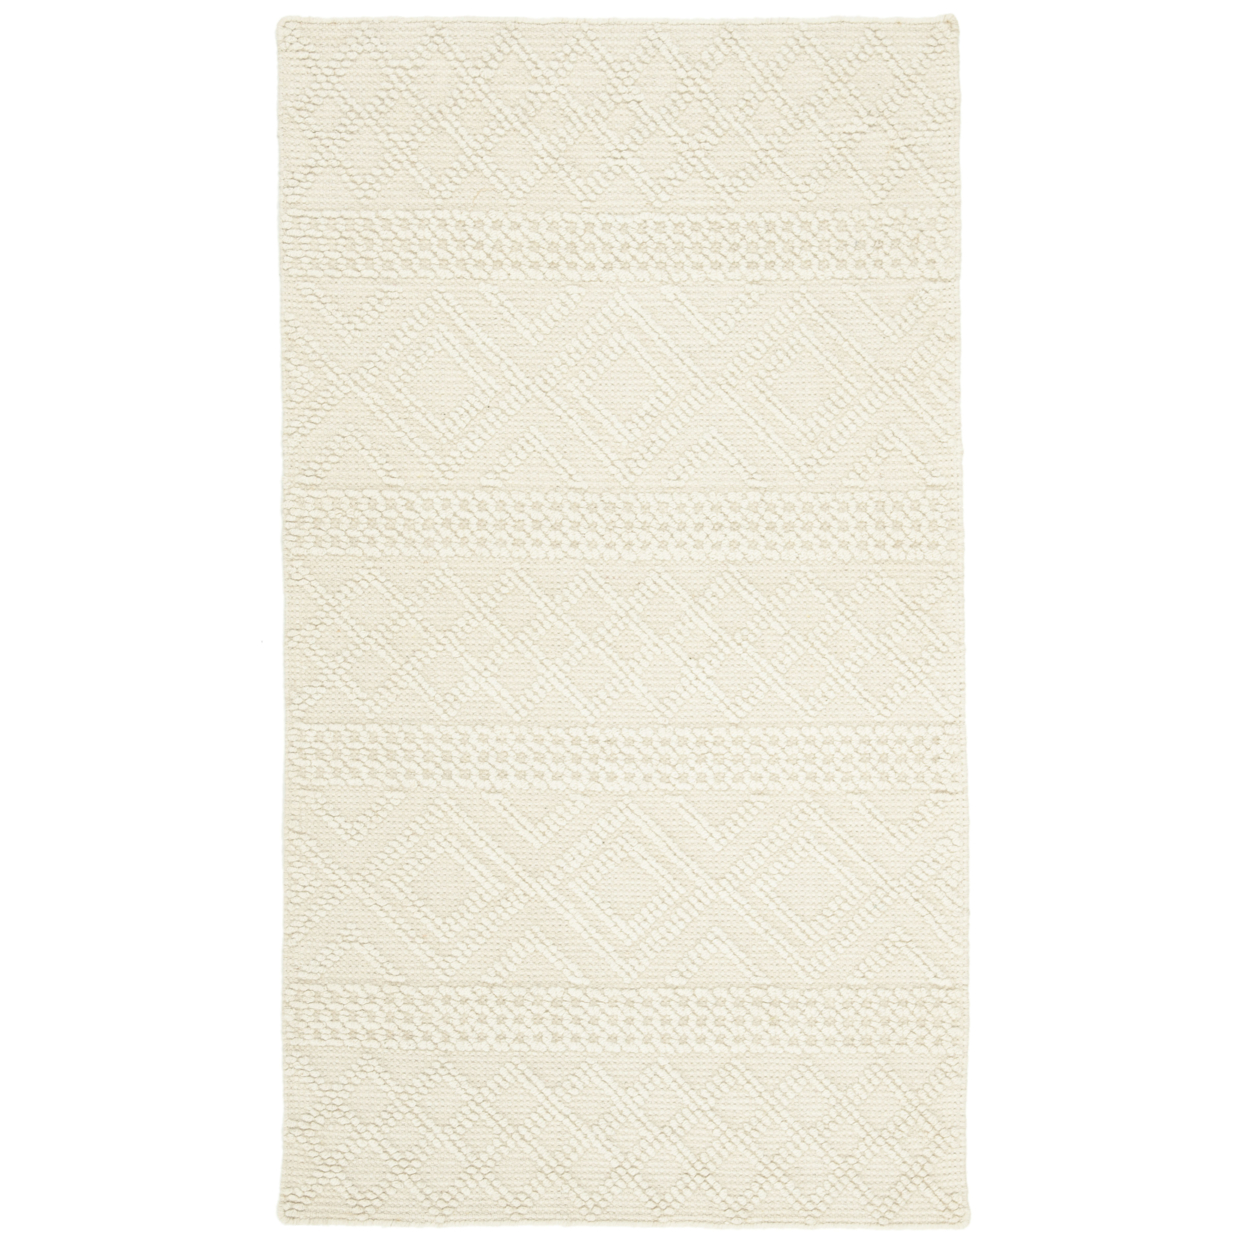 SAFAVIEH Vermont Collection VRM211A Handwoven Ivory Rug - 3 X 5